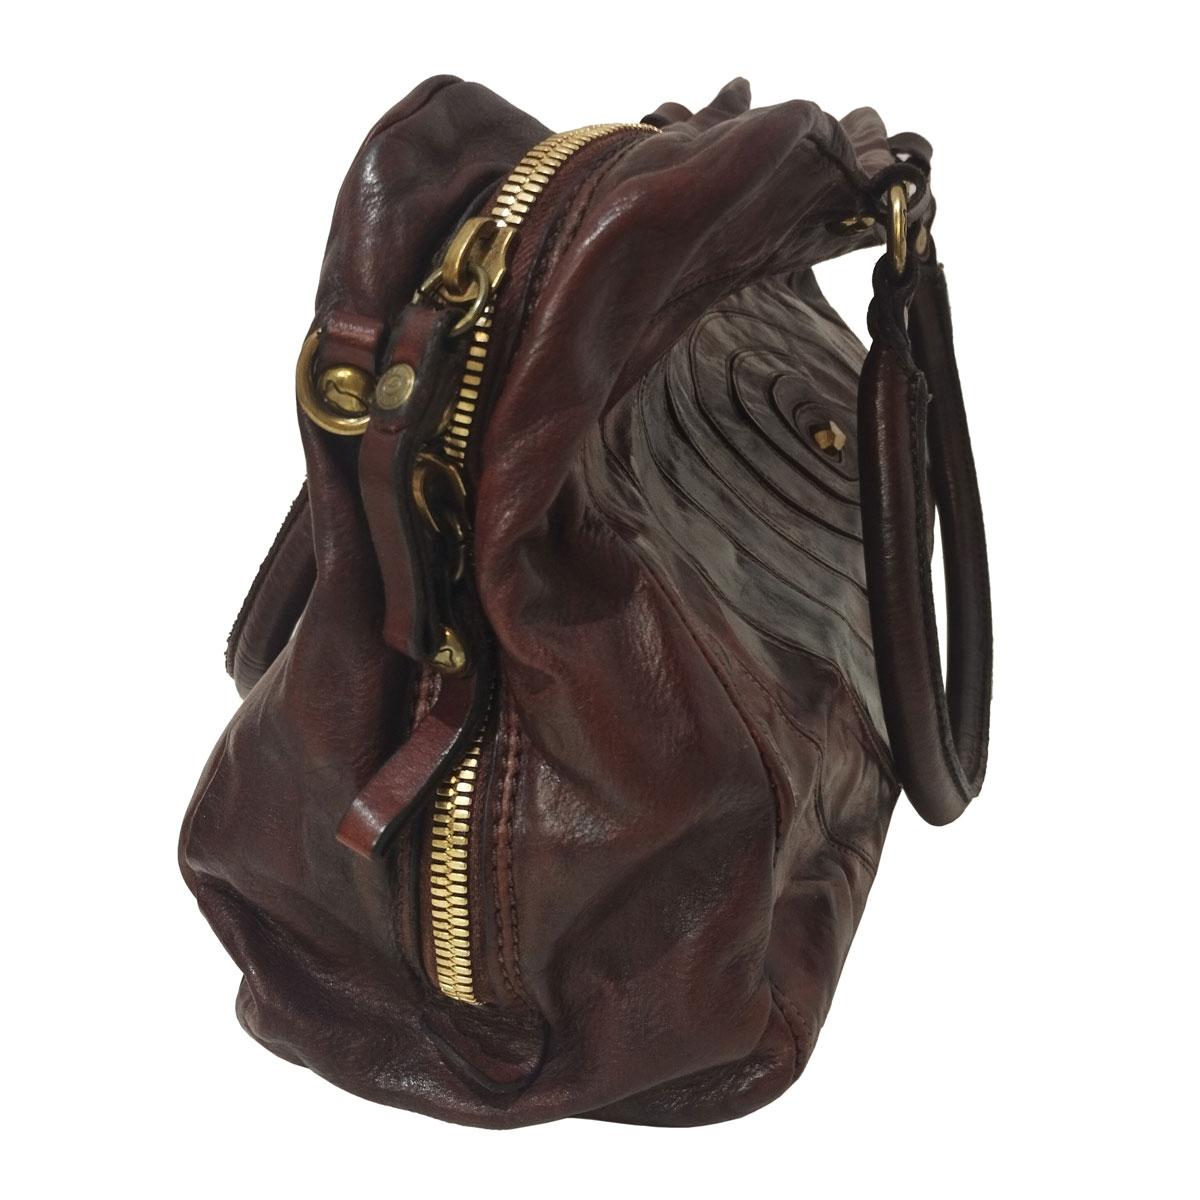 Beautiful and easy to wear italian manufactured bag
Leather bag from Campomaggi Italy
Bordeaux color
Spiral pattern
Double handle
Can be carried crossbody
Zip closure
Internal zip pocket and phone holder
Cm 37 x 25 x 11 (14,5 x 9,84 x 4,33